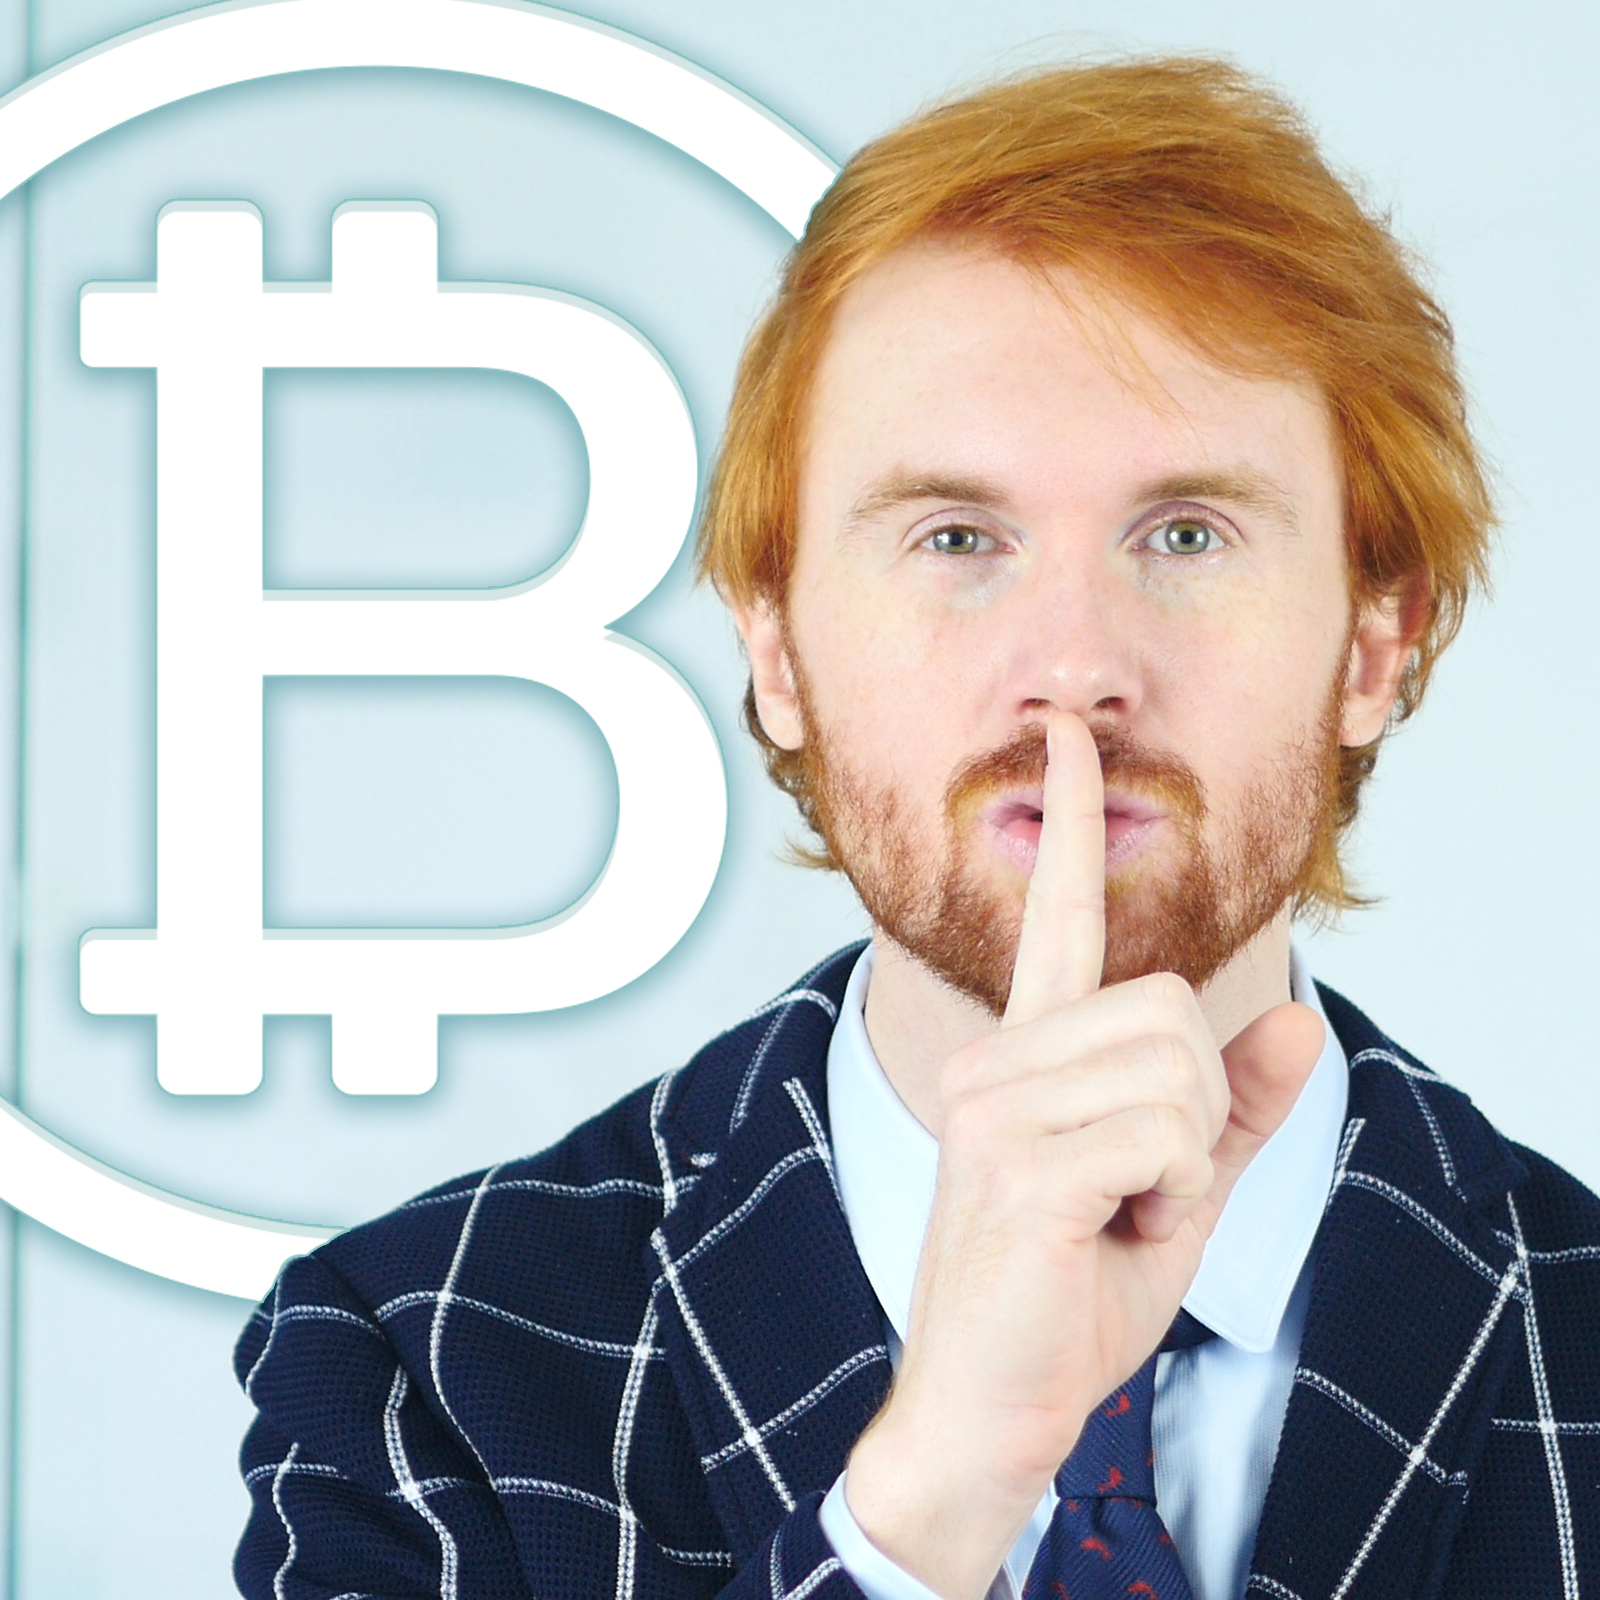 Stay Safer By Keeping Your 'Bitcoin Business' to Yourself